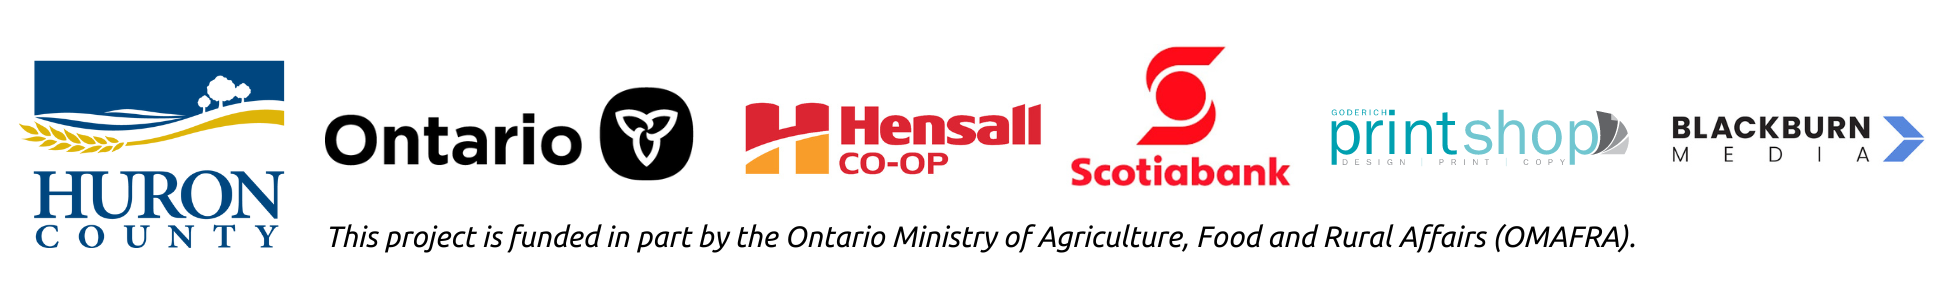 Finding Fairness in Farm Transition Event Sponsors - County of Huron, Ontario, Hensall District Co-Op, Scotiabank, Goderich Print Shop, Blackburn Media